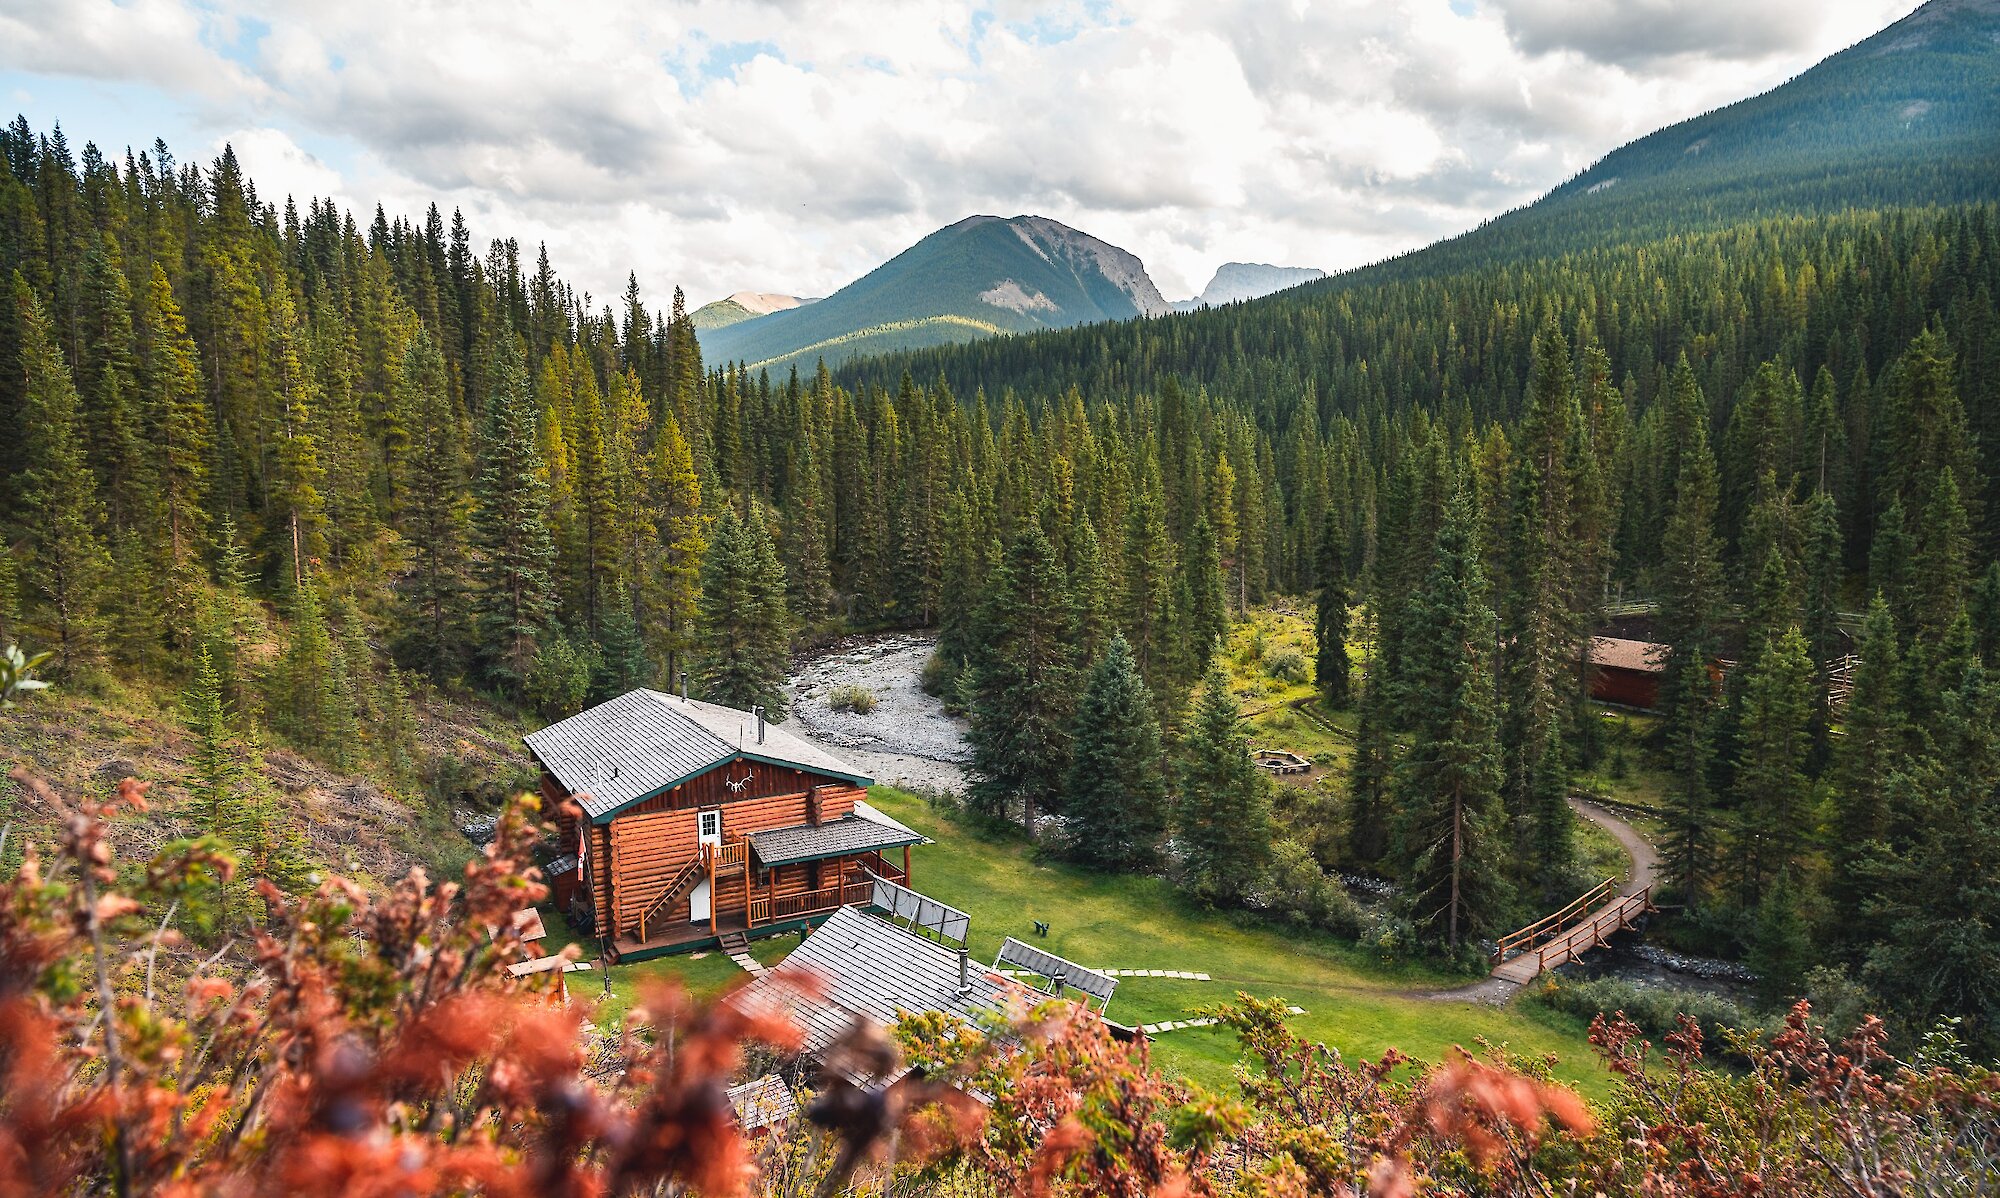 The view of Sundance Lodge in Banff National Park